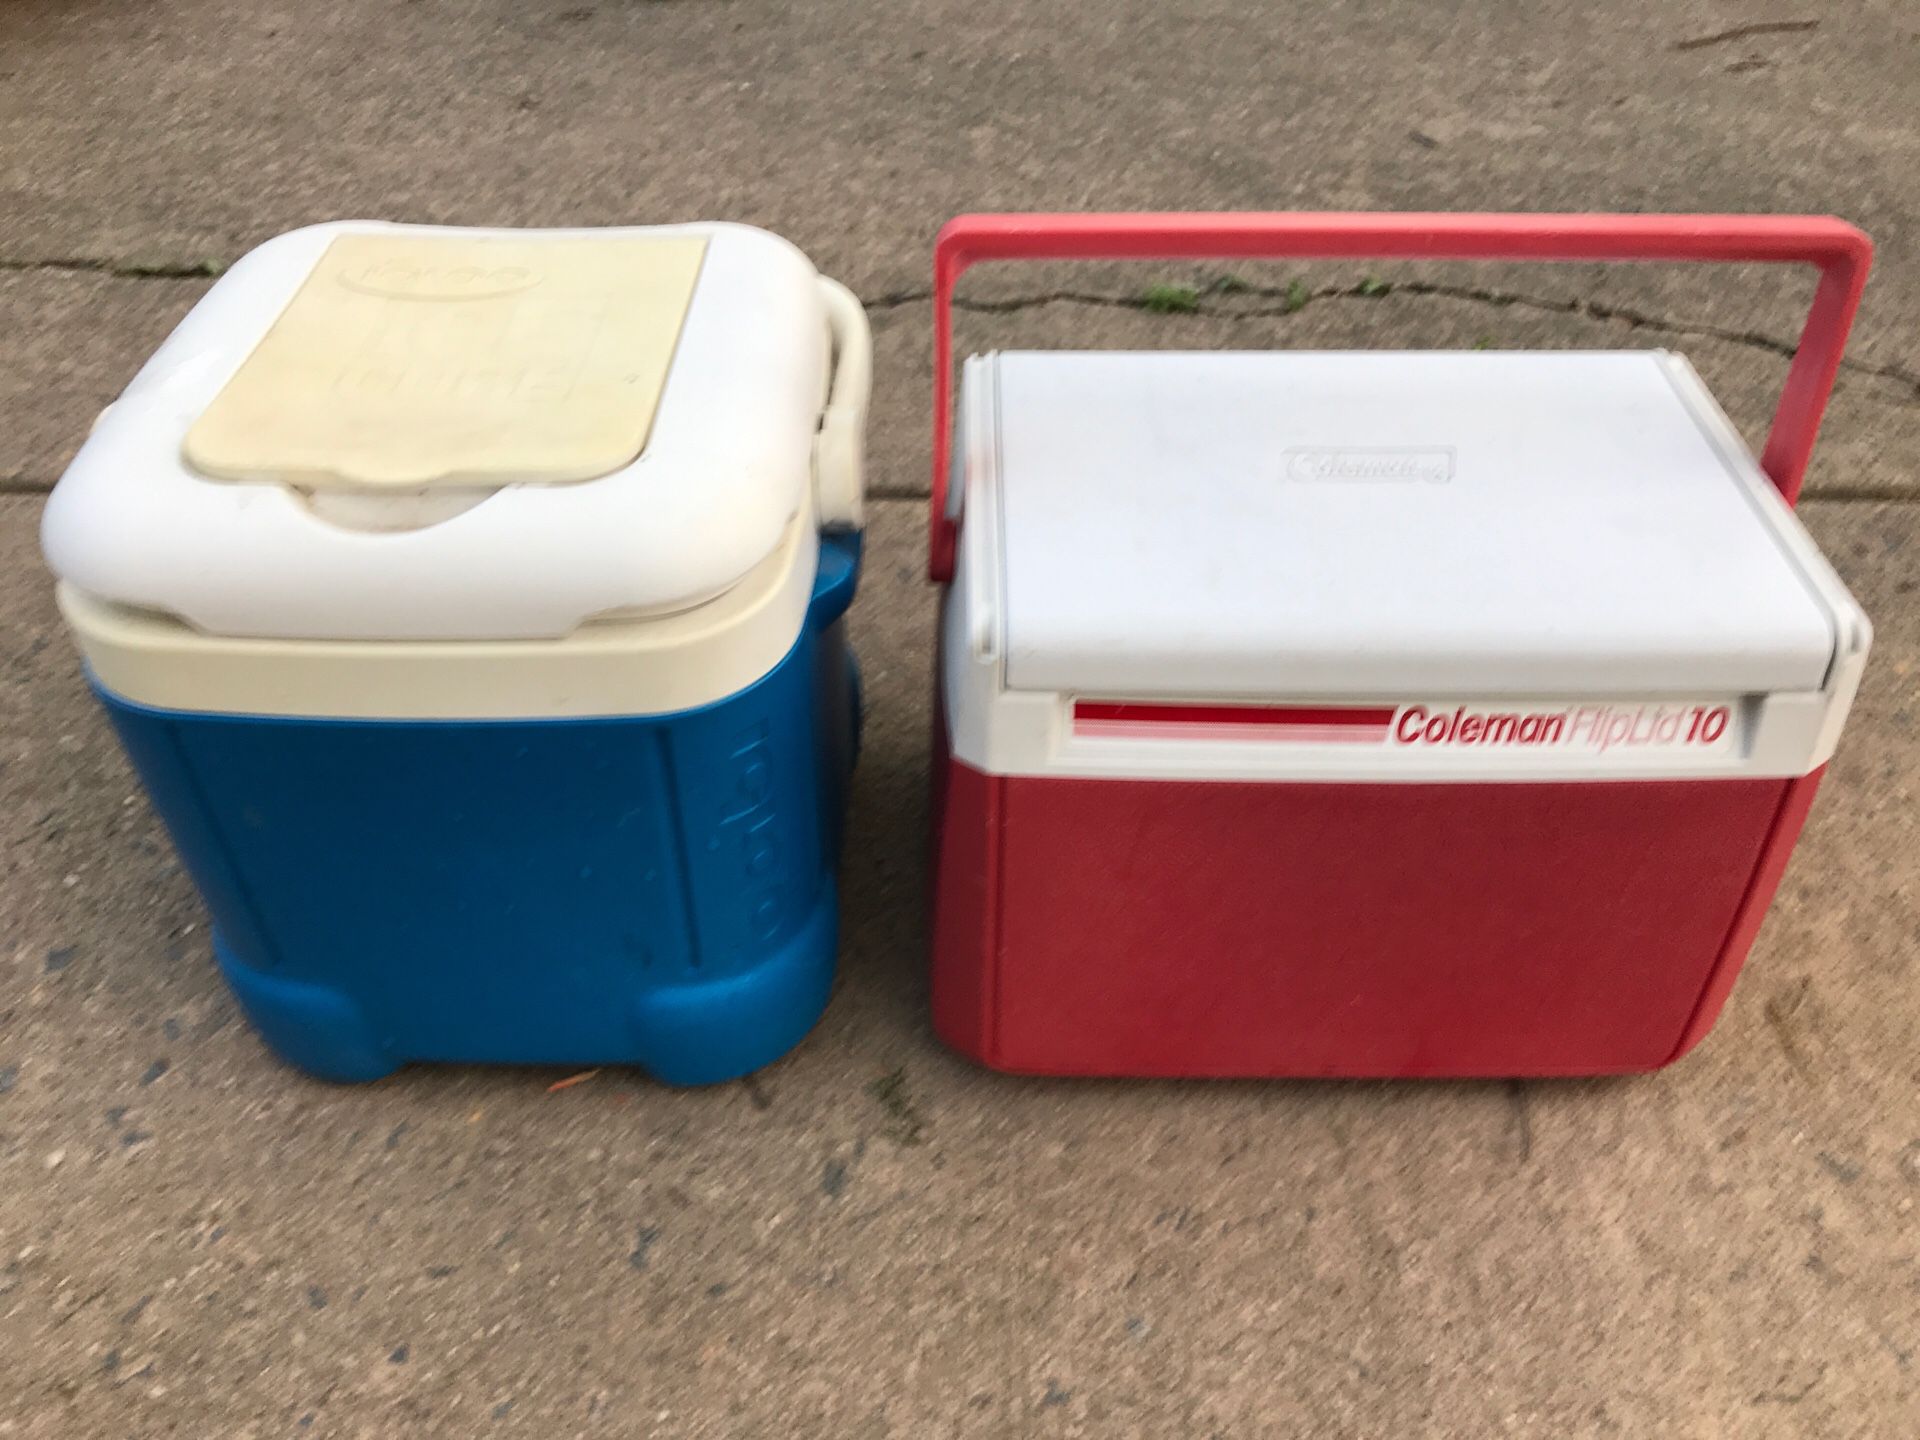 Igloo and Coleman snack coolers